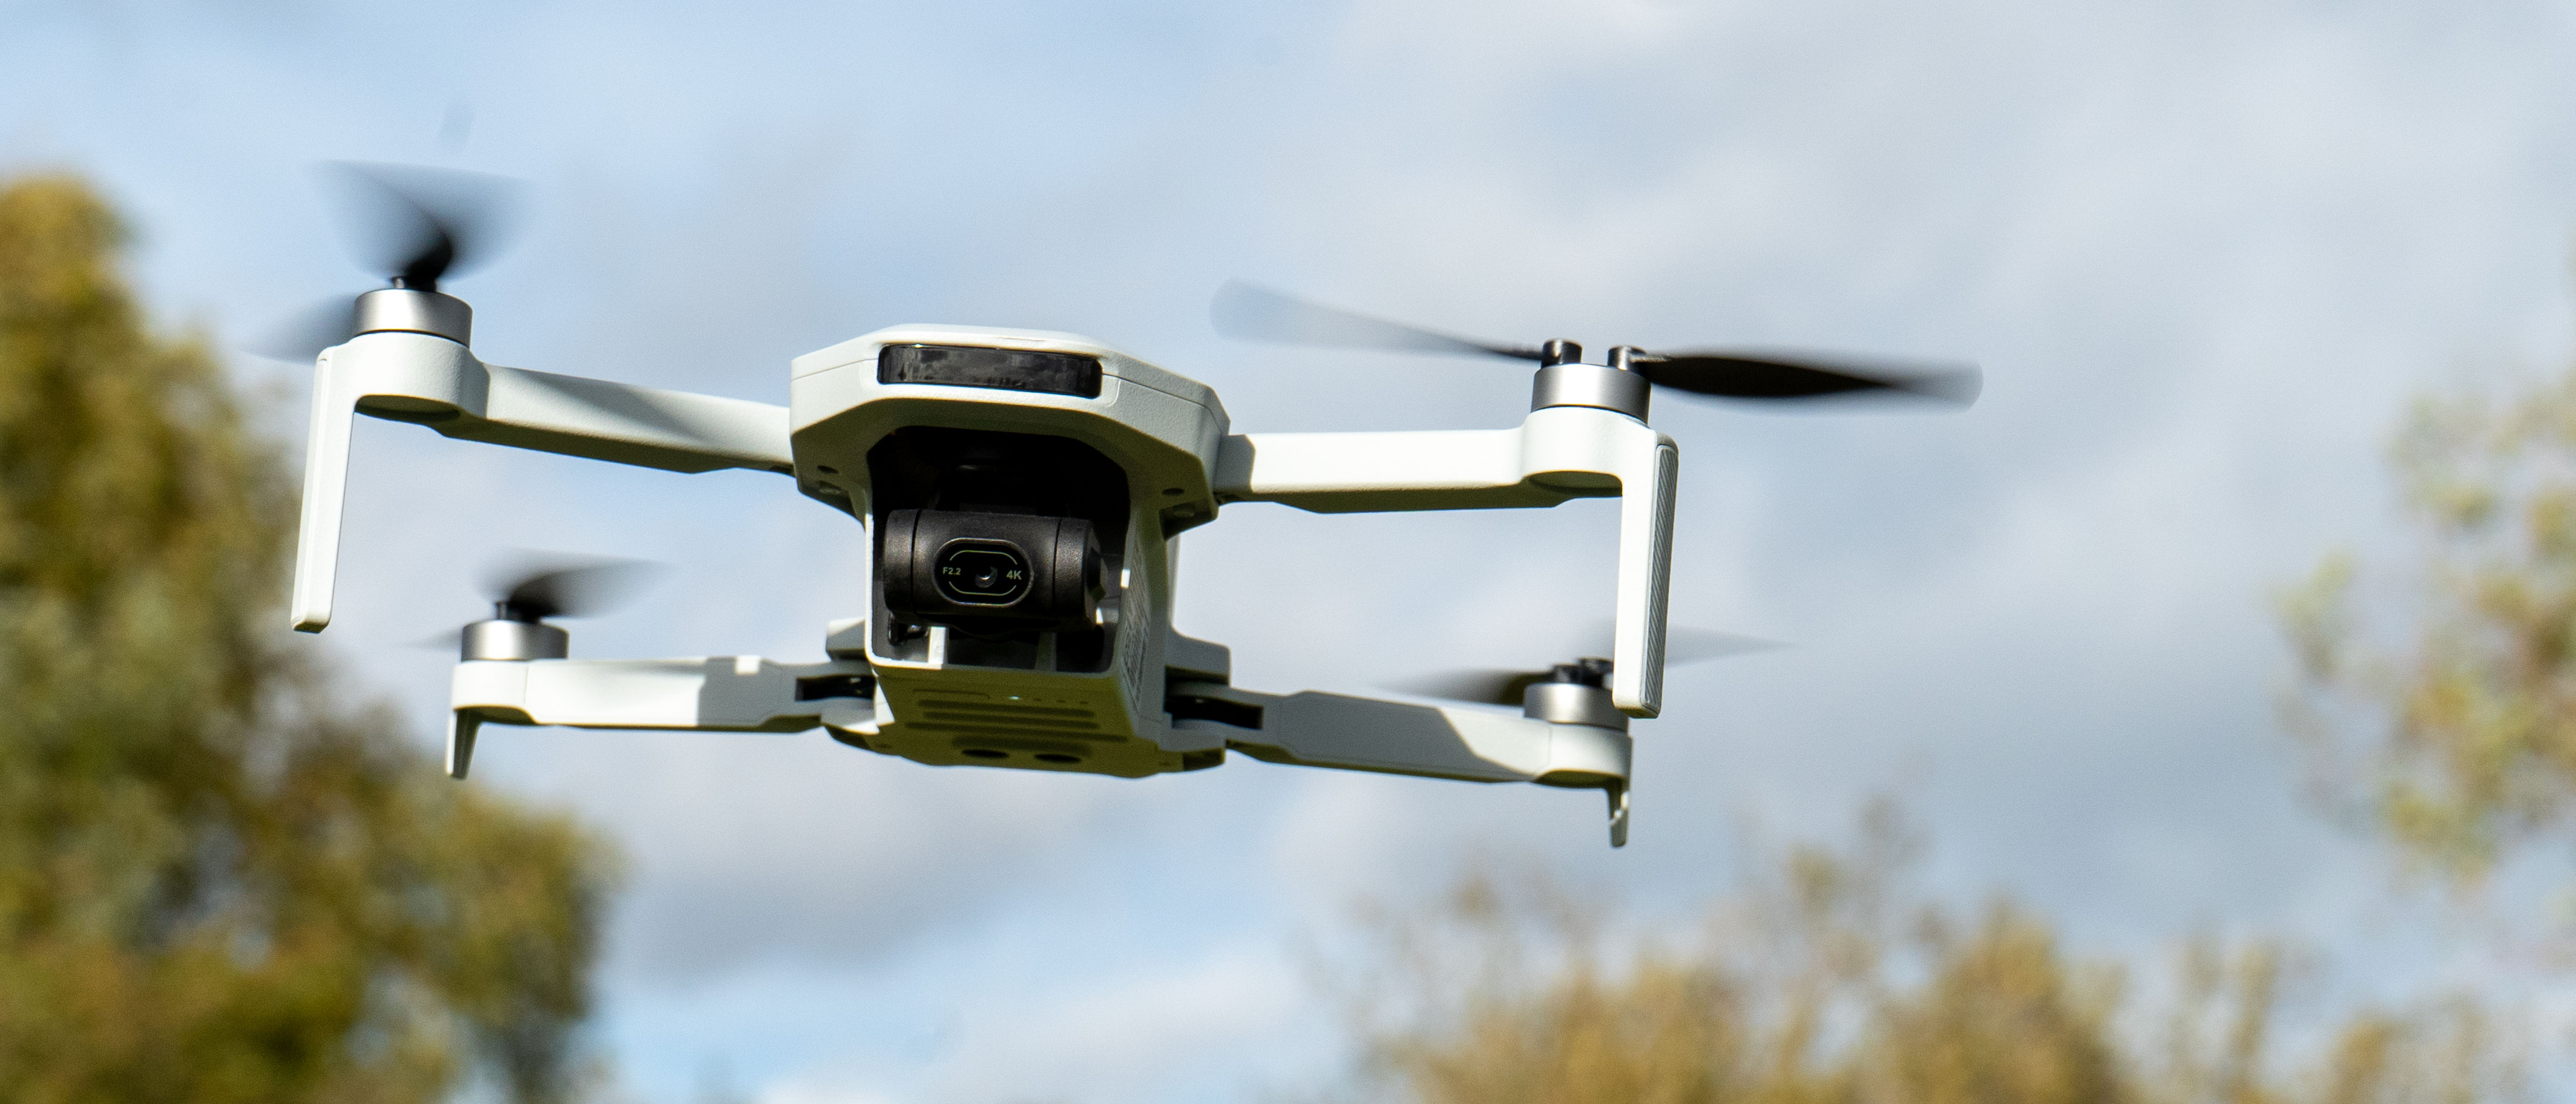 The Potensic Atom SE is a sub 250g budget 4K drone with